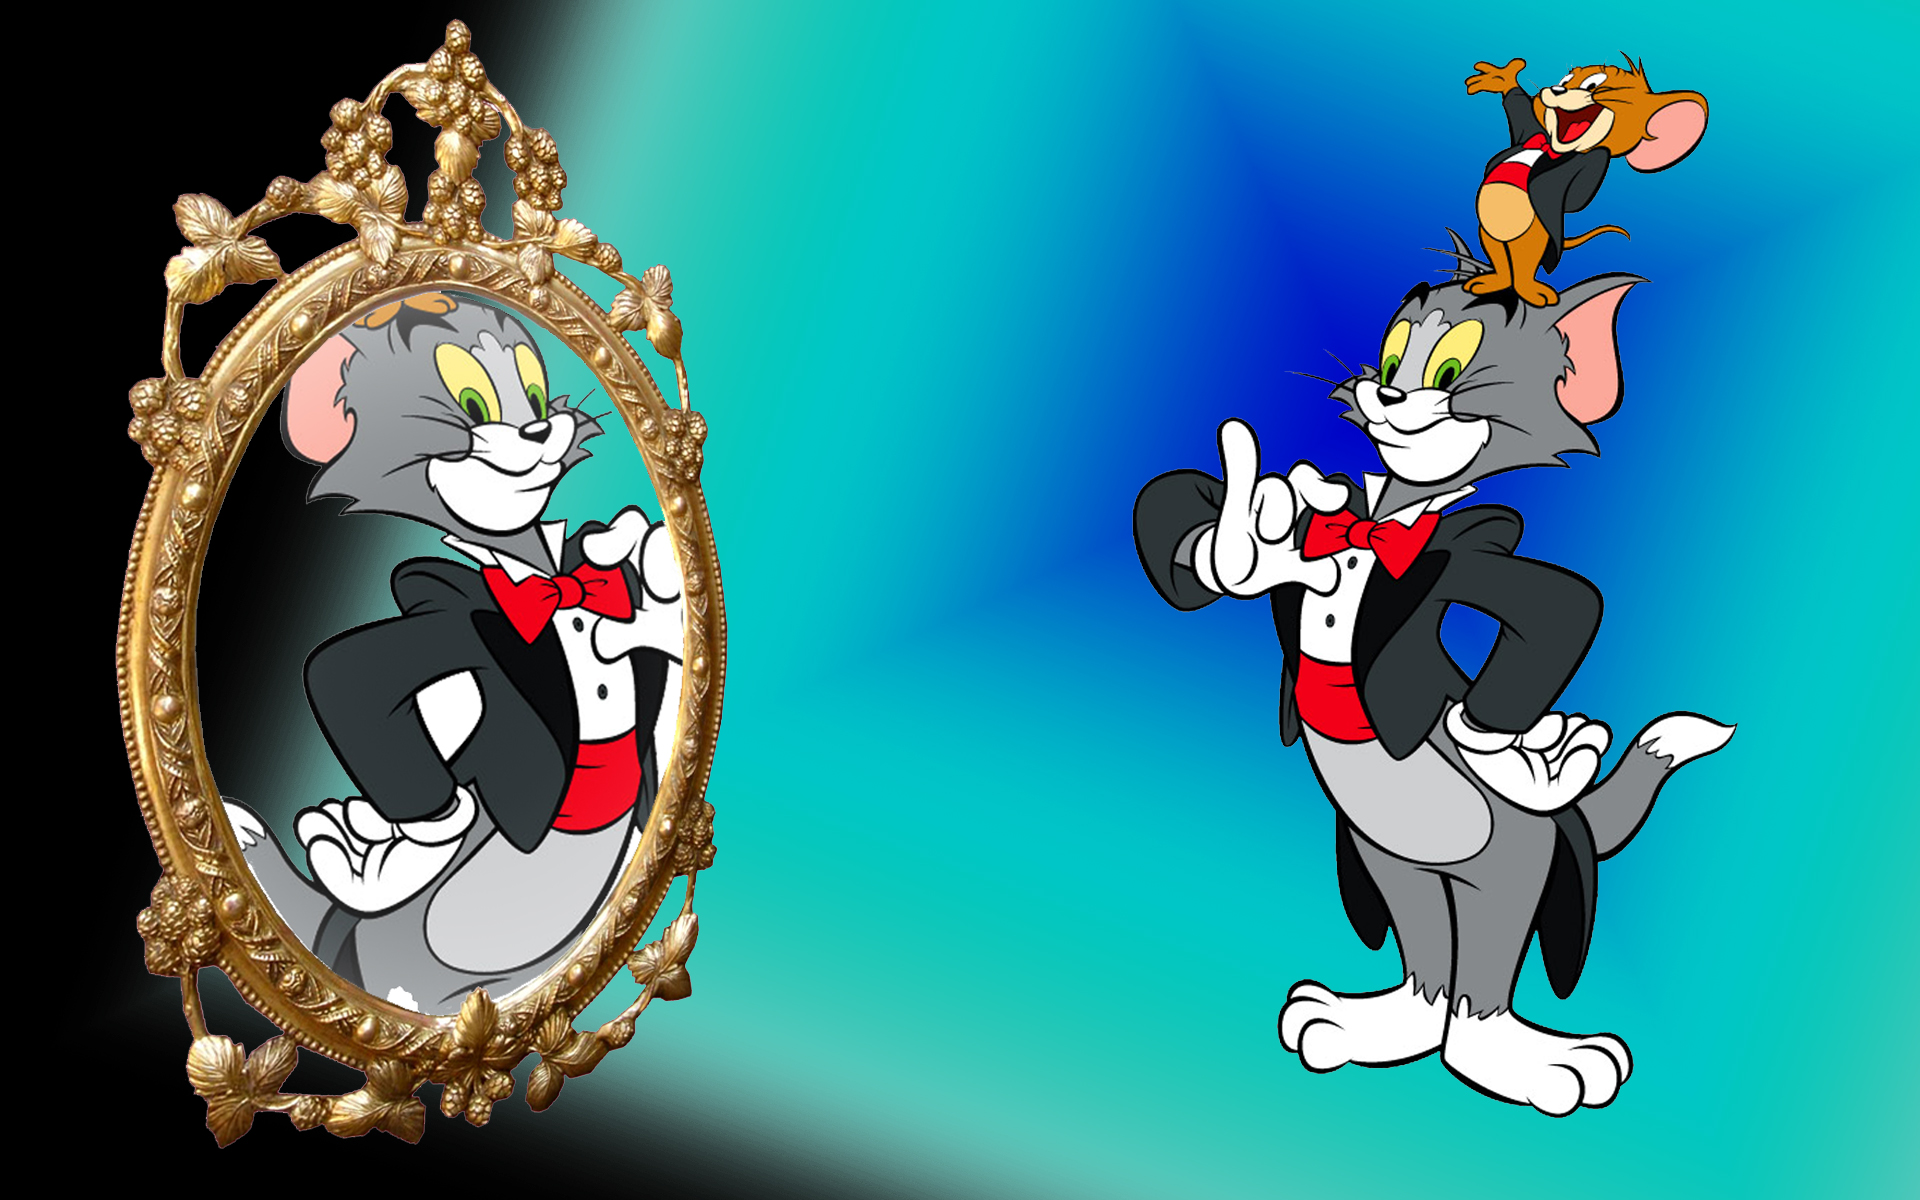 Pictures Of Tom And Jerry Cartoons Desktop Hd Wallpaper 1920x1200.